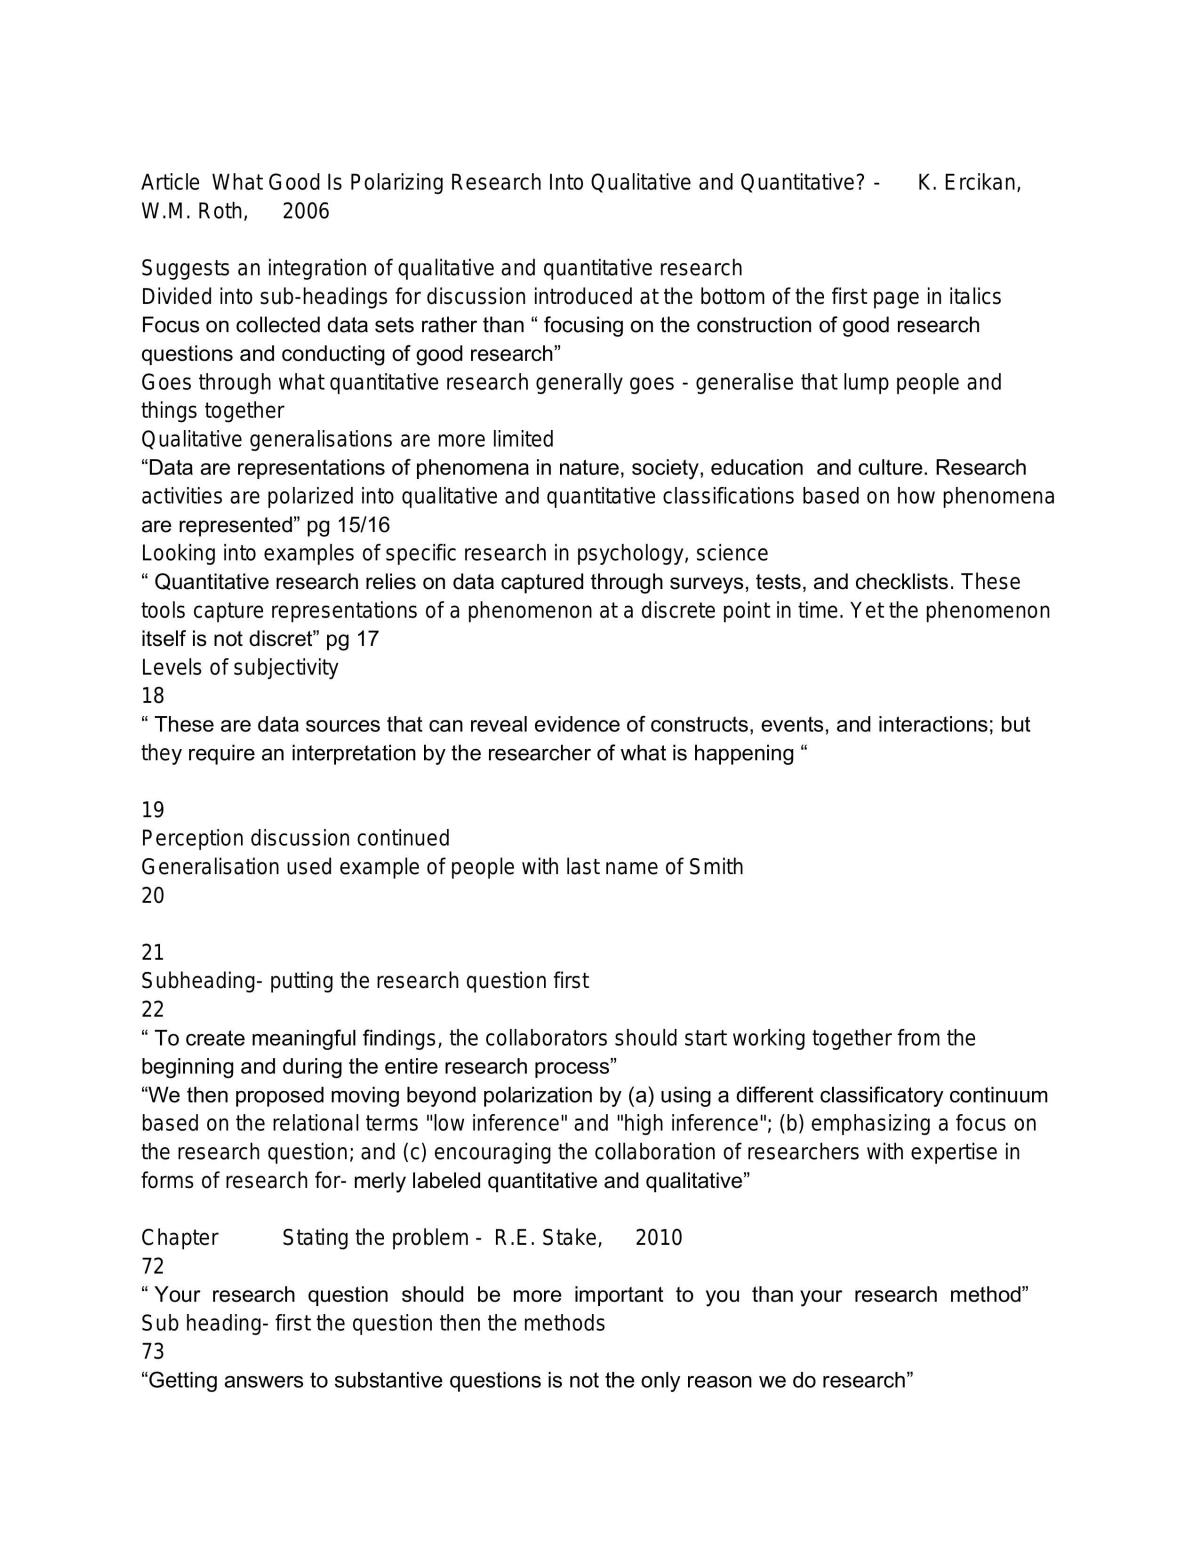 EIE703 Prescribed Reading Notes - Page 1